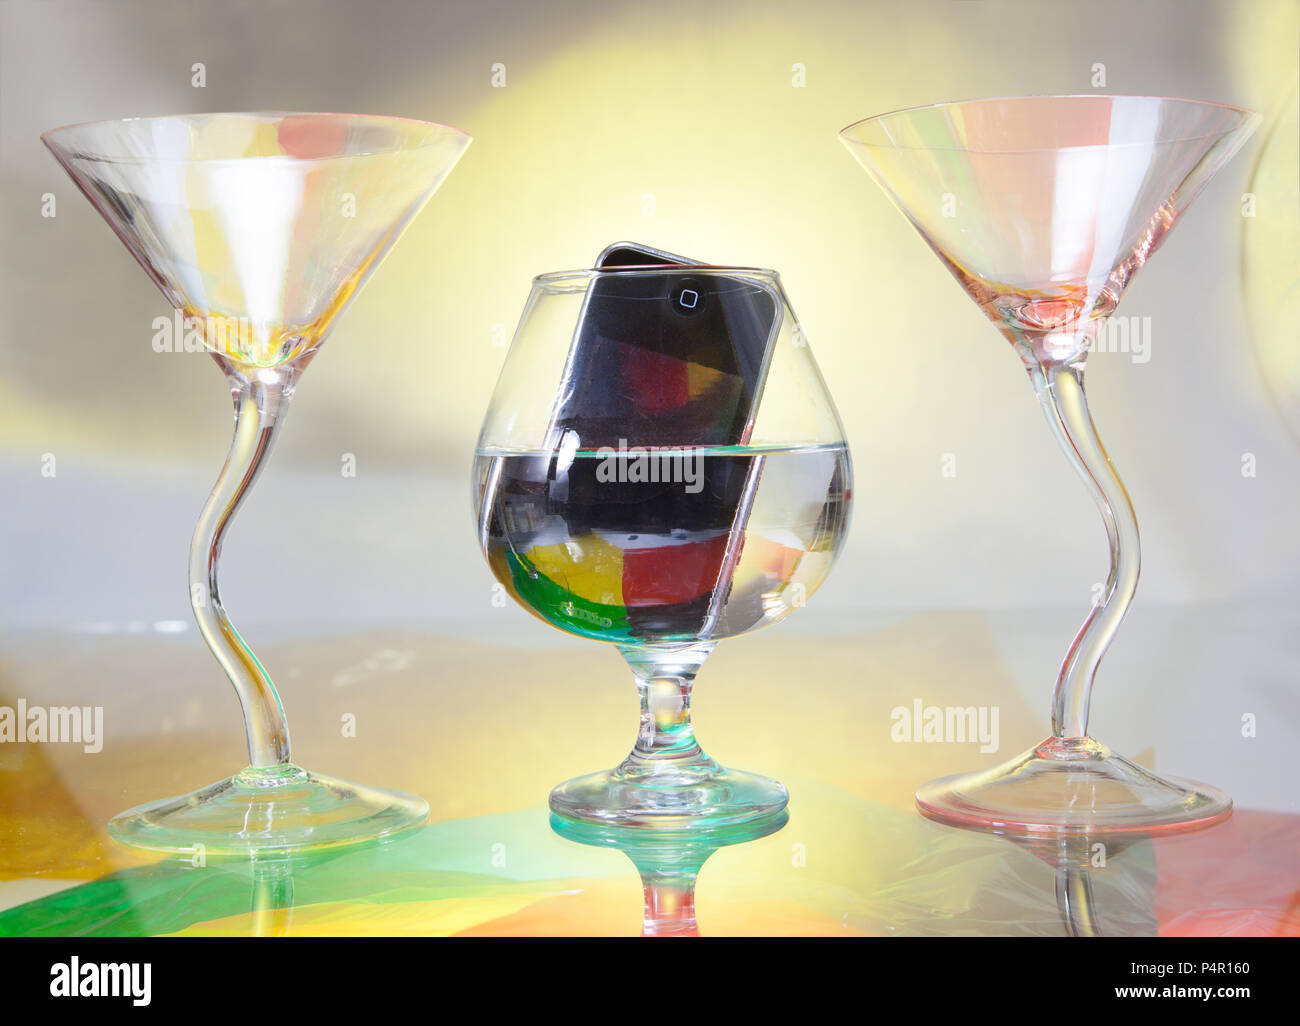 In the middle, you see a brandy glass in which a cell phone is immersed. Two cocktail glasses frame the scene Stock Photo